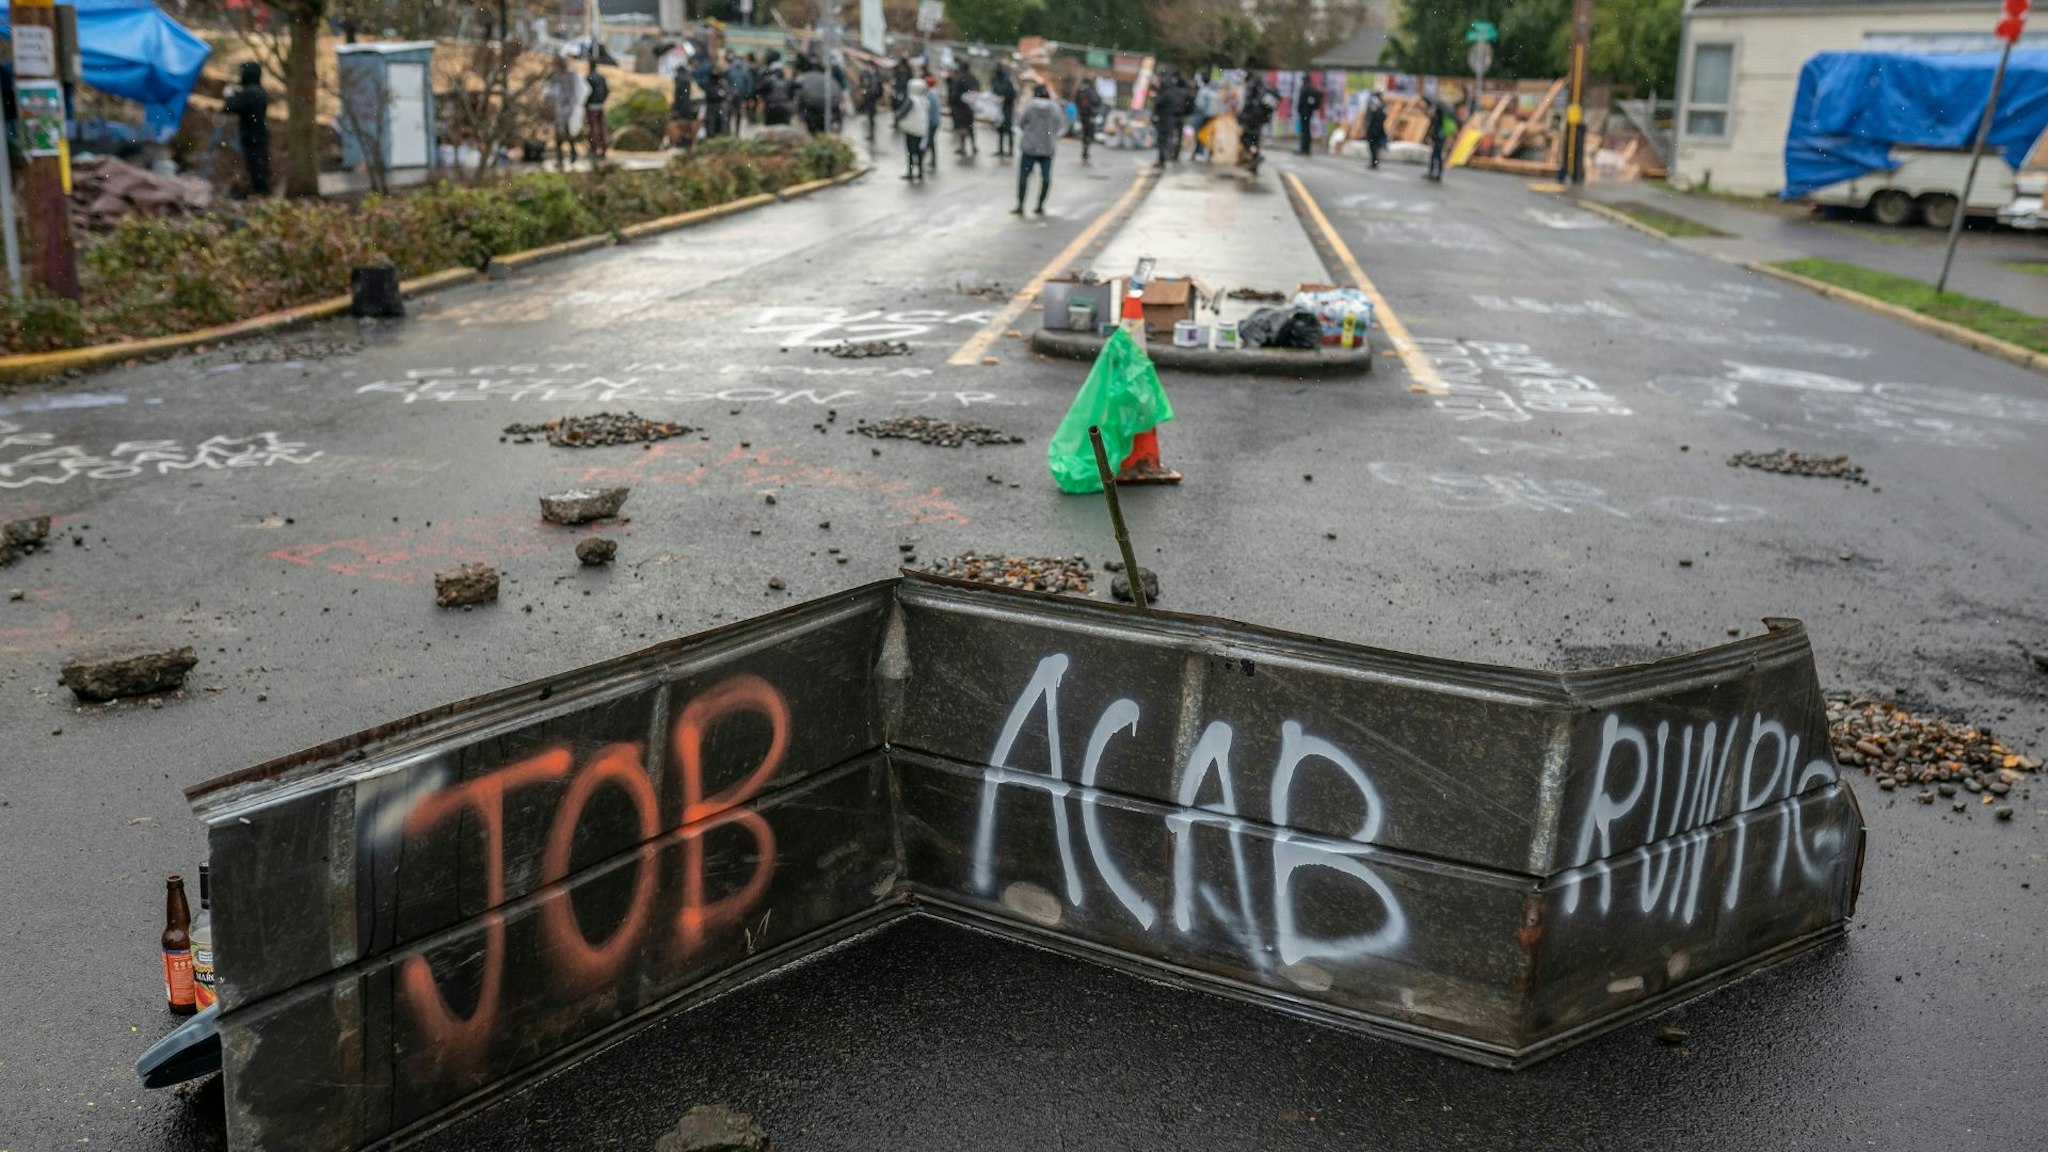 PORTLAND, OR - DECEMBER 09: Protesters walk past part of a barricade near the Red House on Mississippi on December 9, 2020 in Portland, Oregon. Police and protesters clashed during an attempted eviction Tuesday, leading protesters to establish a barricade around the Red House.